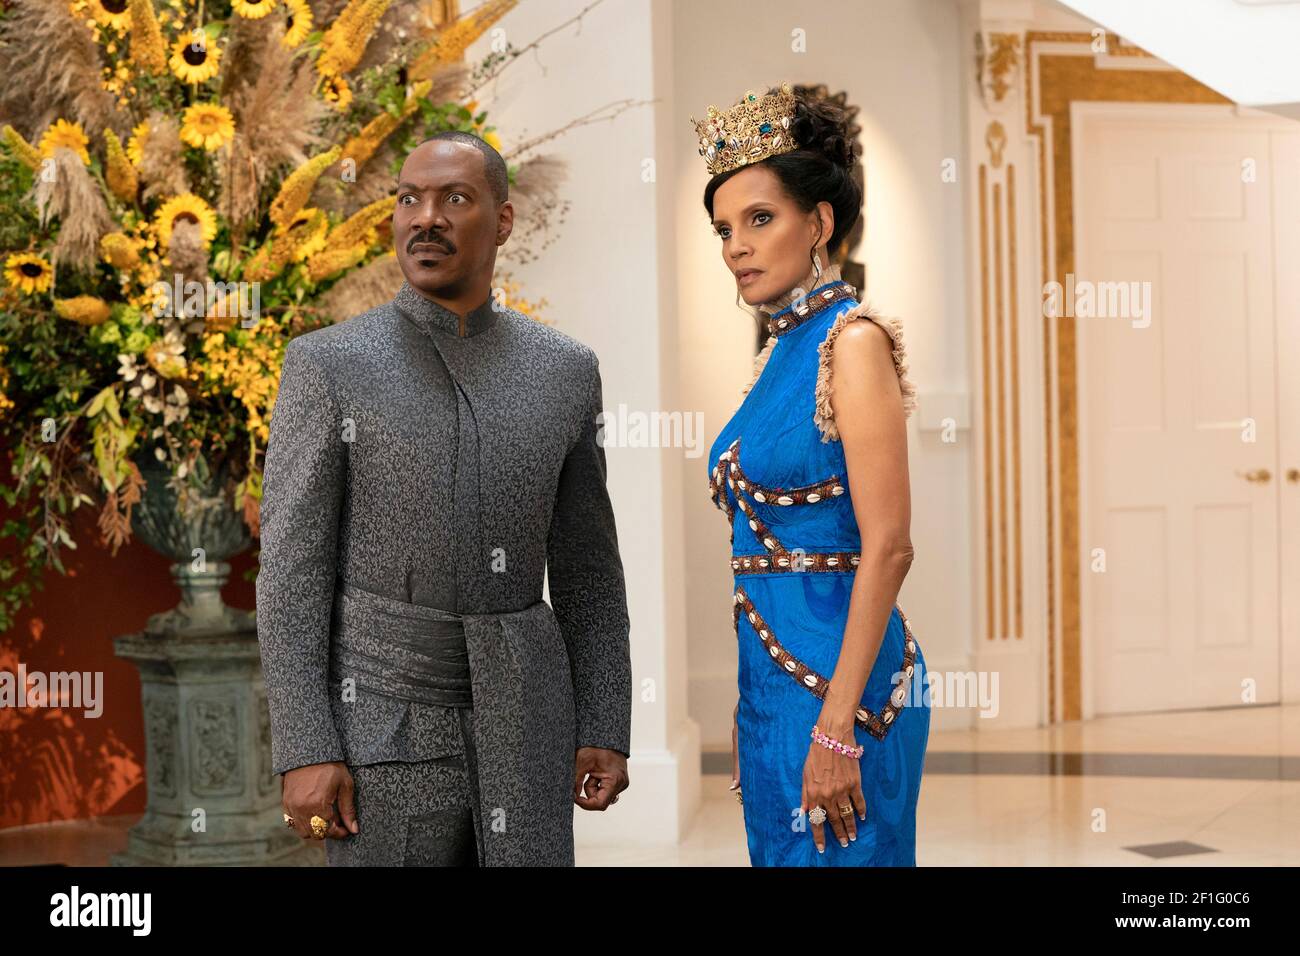 Coming 2 America (2021) directed by Craig Brewer and starring Eddie Murphy as Prince Akeem and Shari Headley as Lisa in this sequel to the 1988 Coming to America. Stock Photo